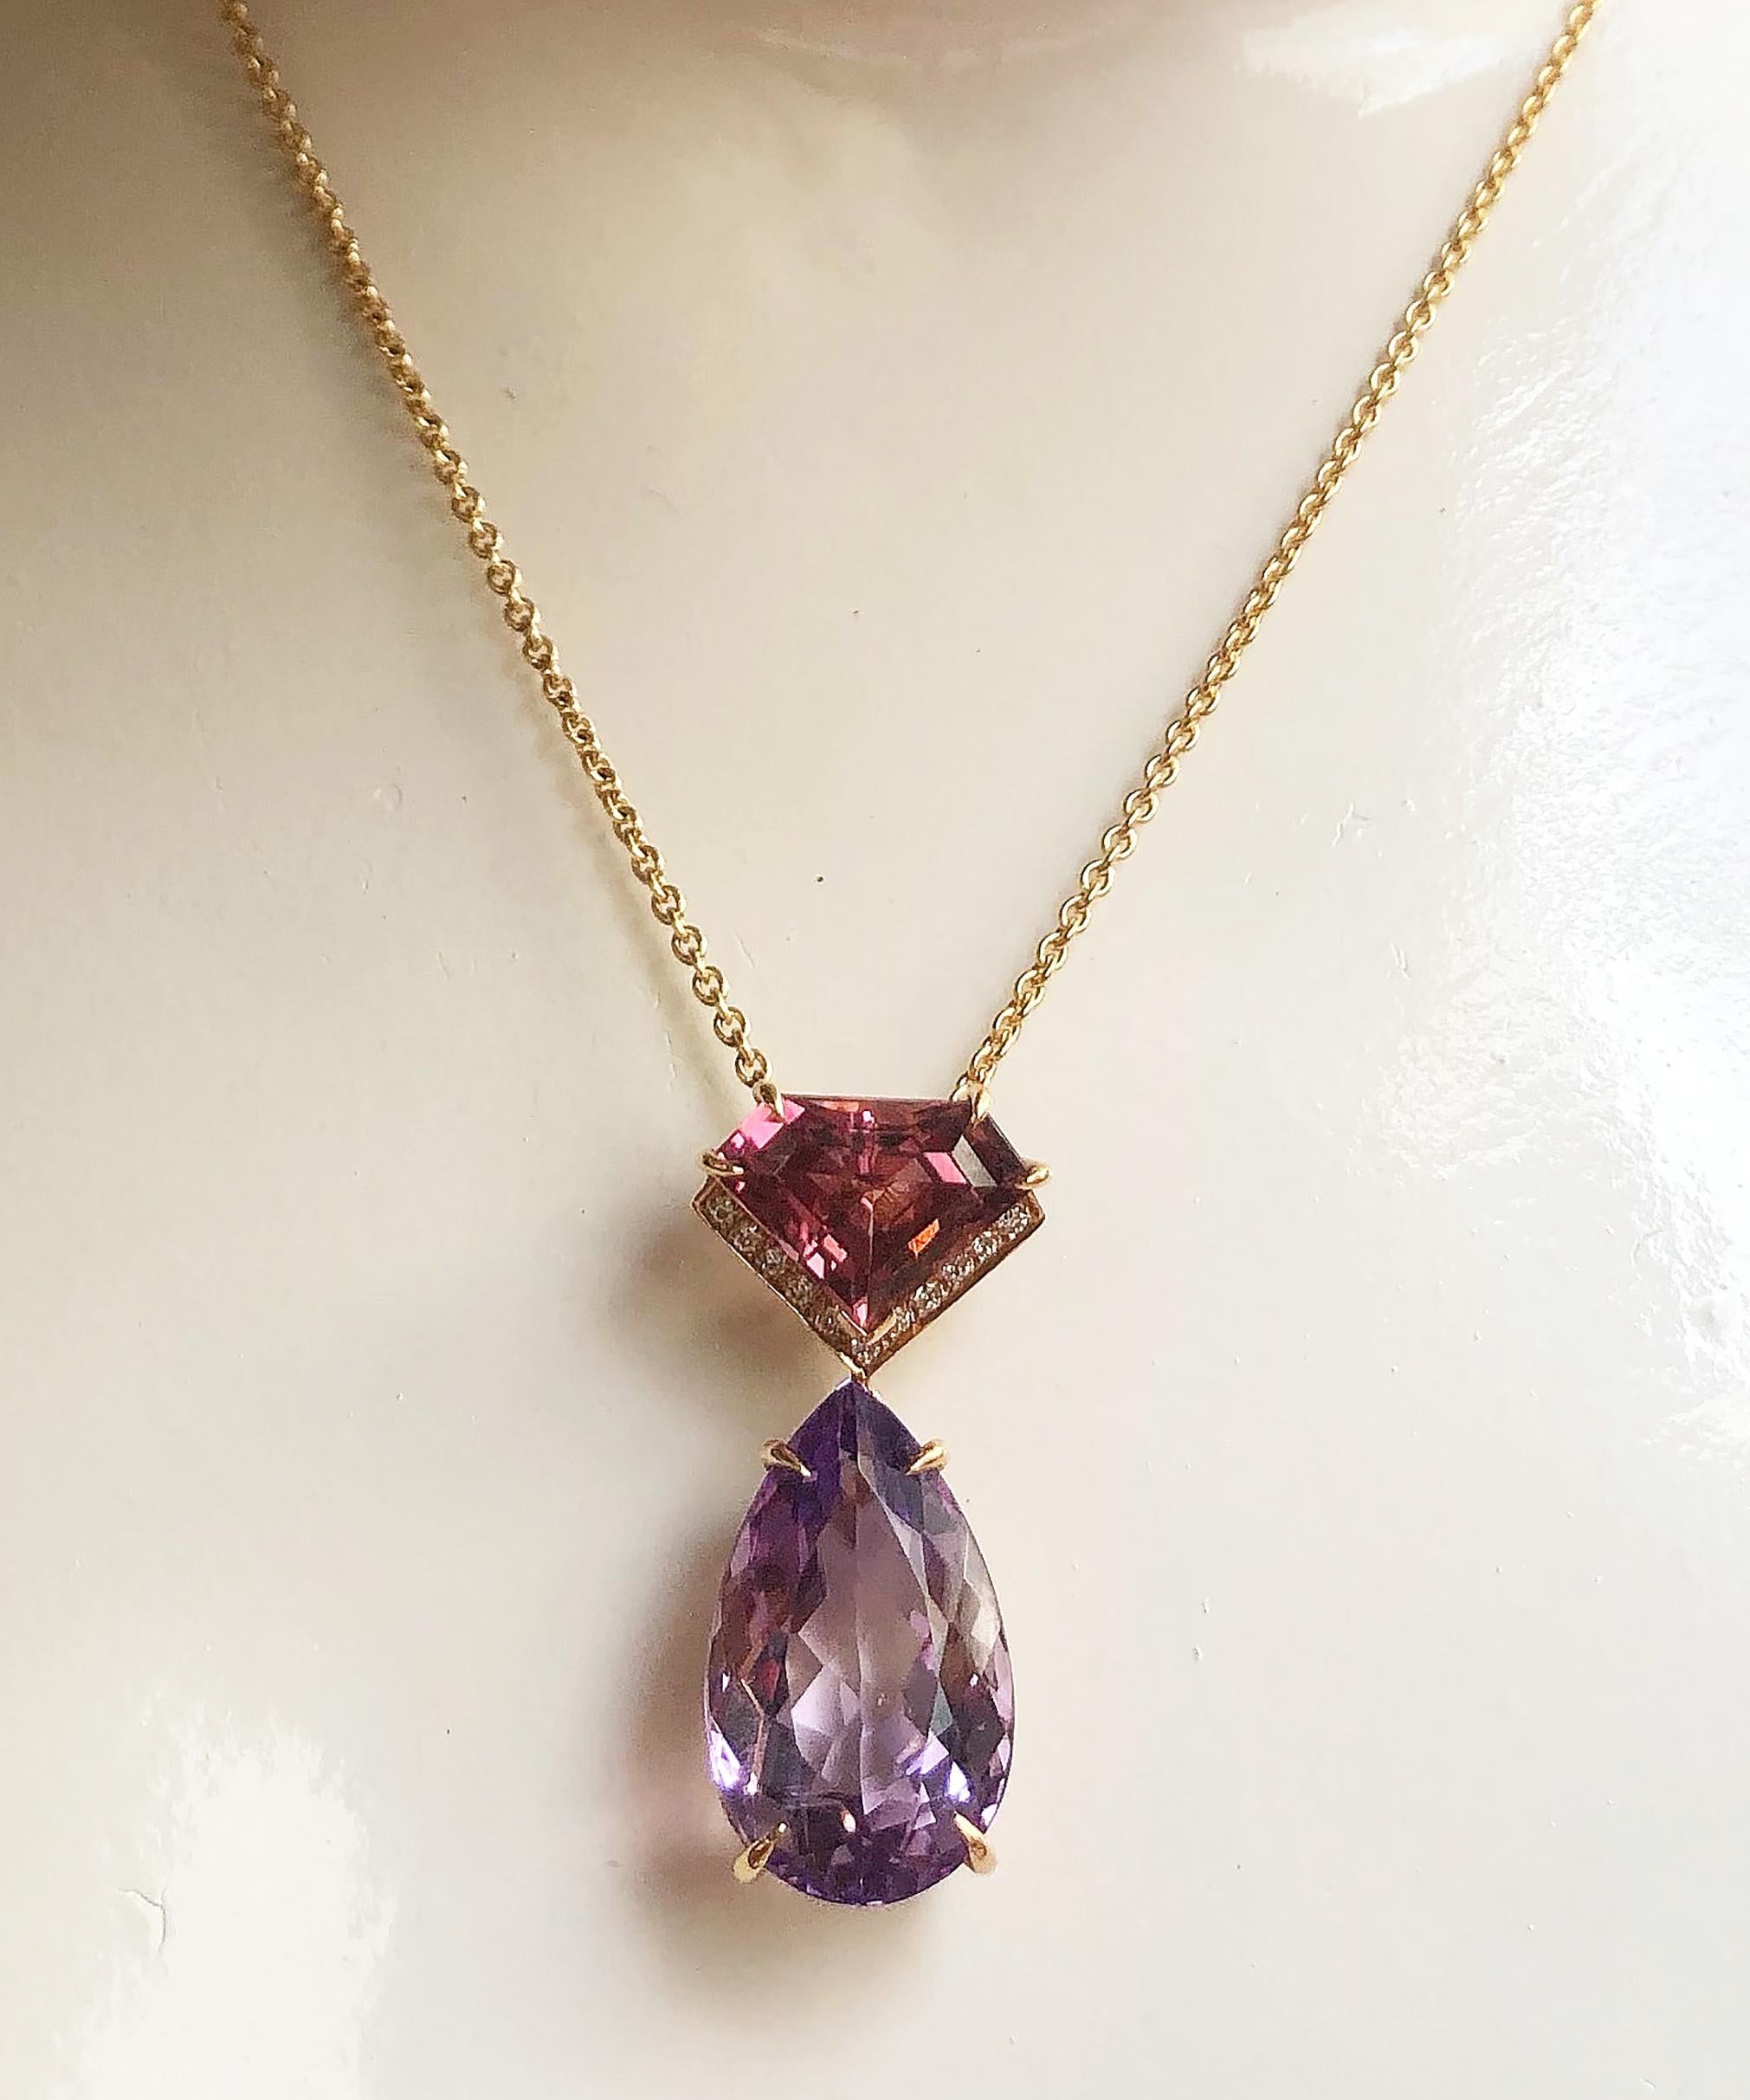 Pink Tourmaline 3.04 carats, Amethyst 8.70 carats with Diamond 0.09 carat Pendant set in 18 Karat Rose Gold Settings
(chain not included)

Width: 1.4 cm
Length: 3.0 cm 

